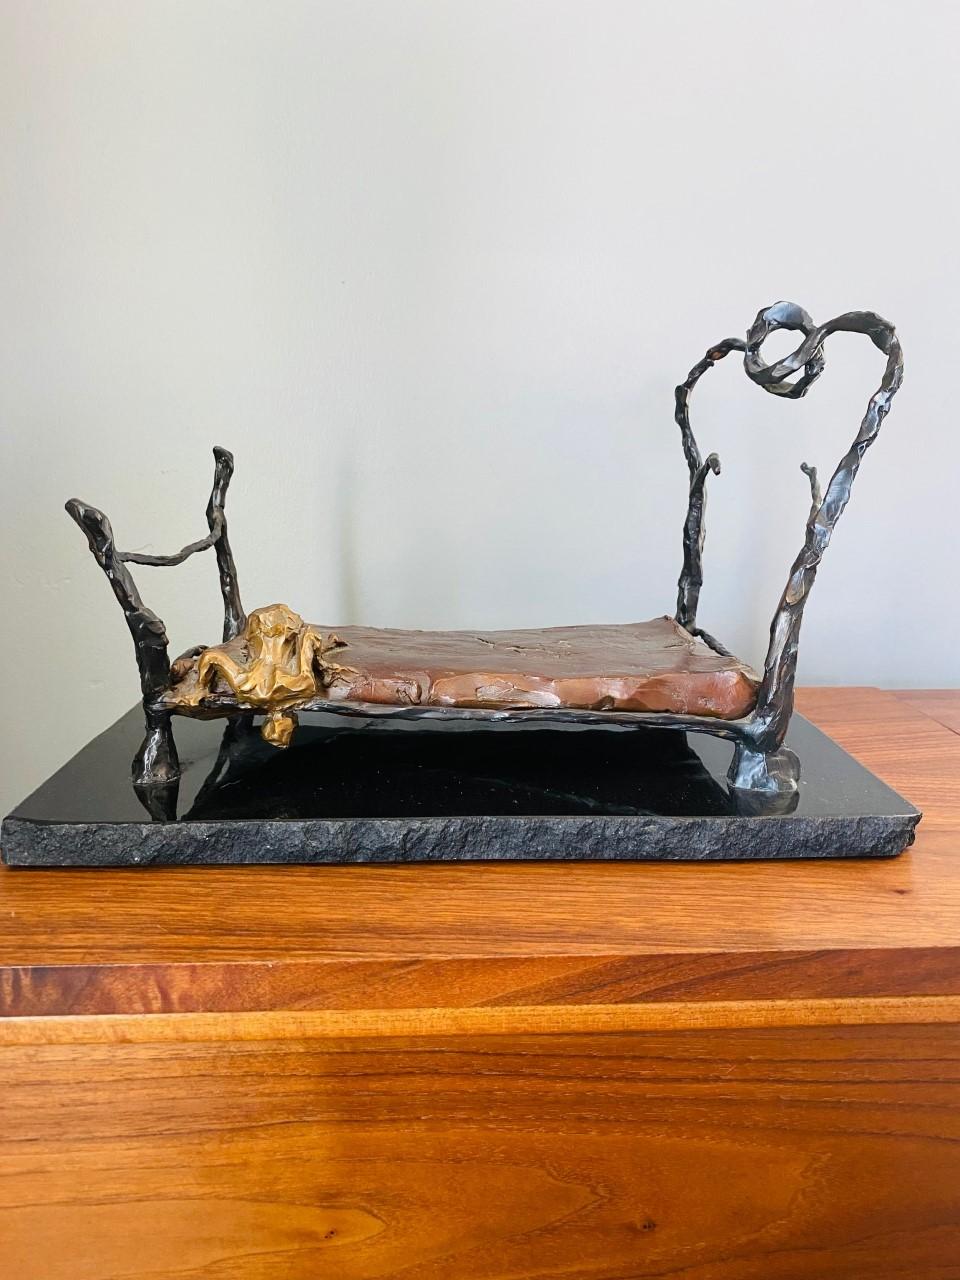 Beautiful sculpture by renowned artist Linda Prokop. This piece “Just Making Sure” by the acclaimed artist is infused with a dynamic sense of expression and style. Whimsically styled and strongly modelled on expressionism, this piece tells a story.